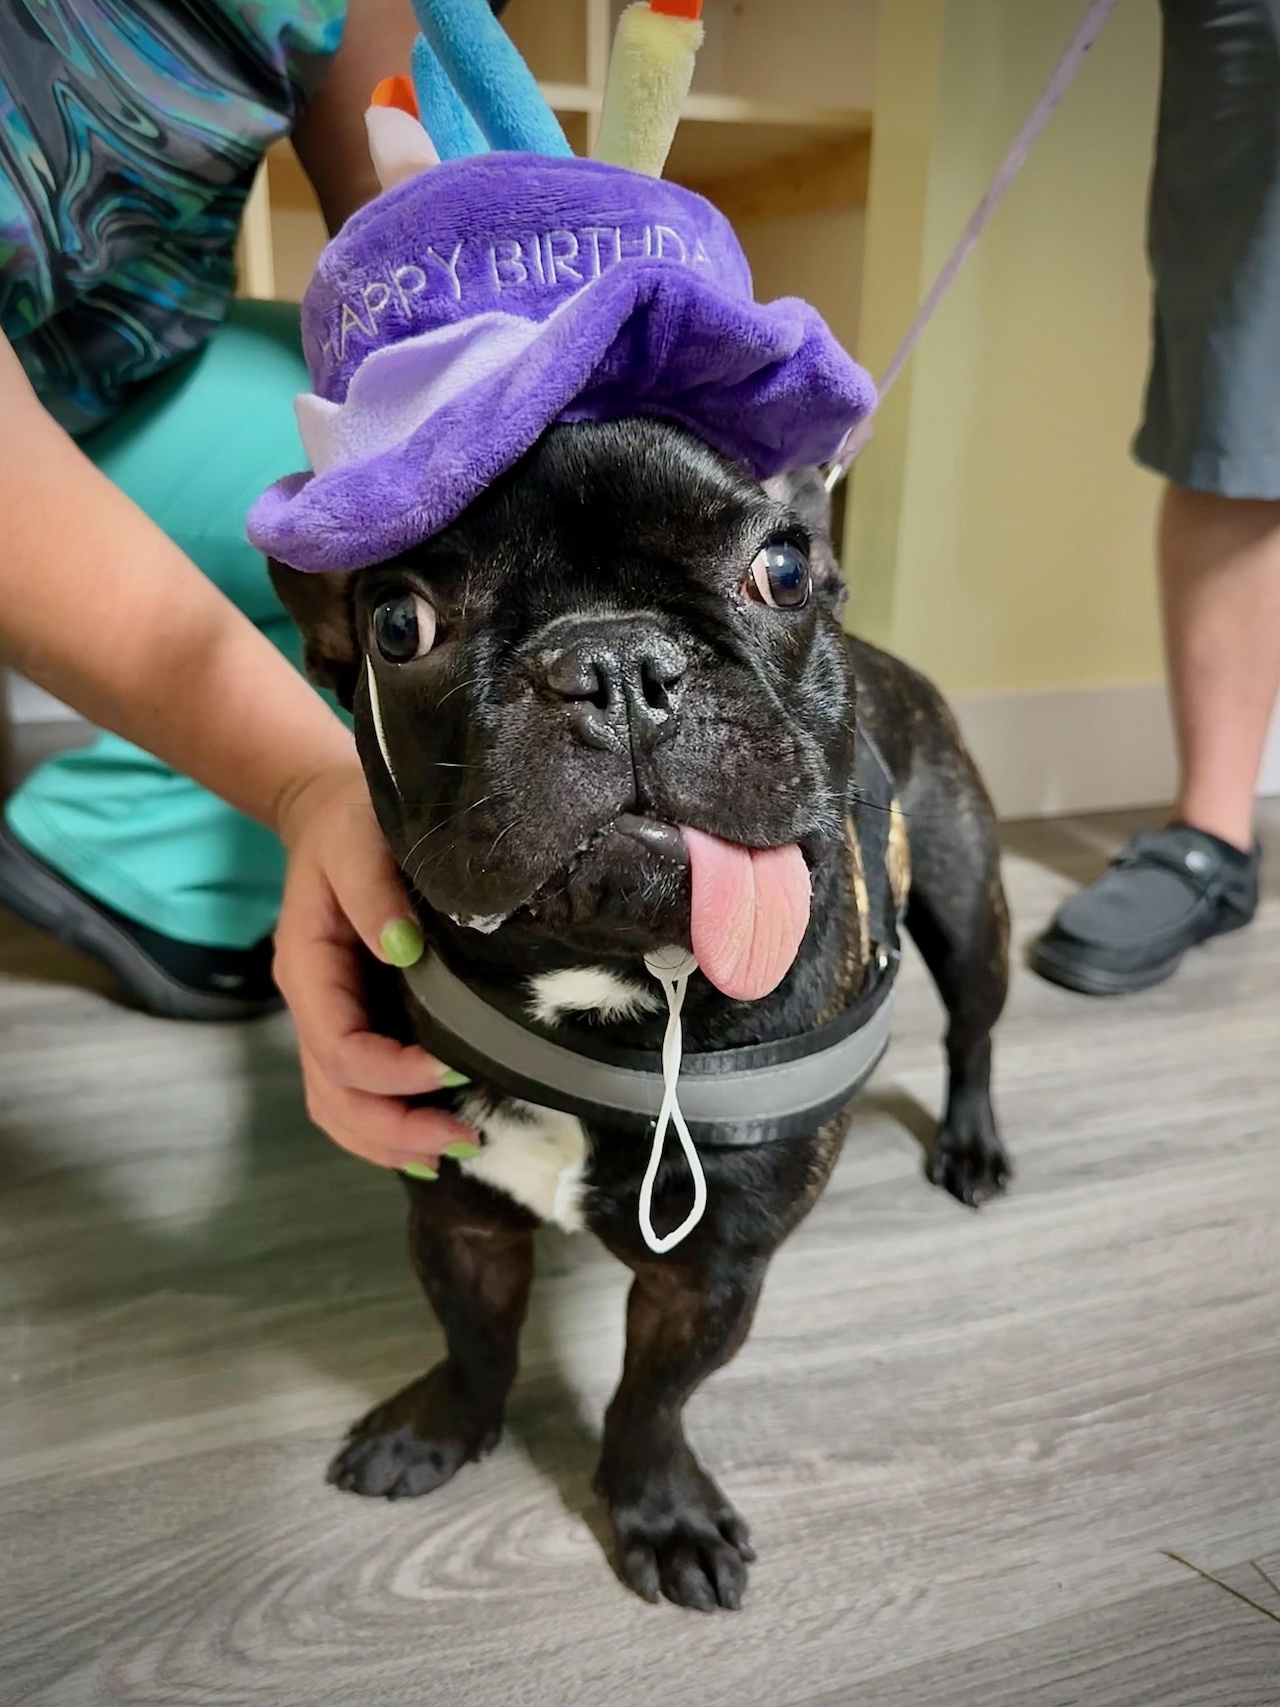 A French bulldog in a birthday hat with his tongue hanging out